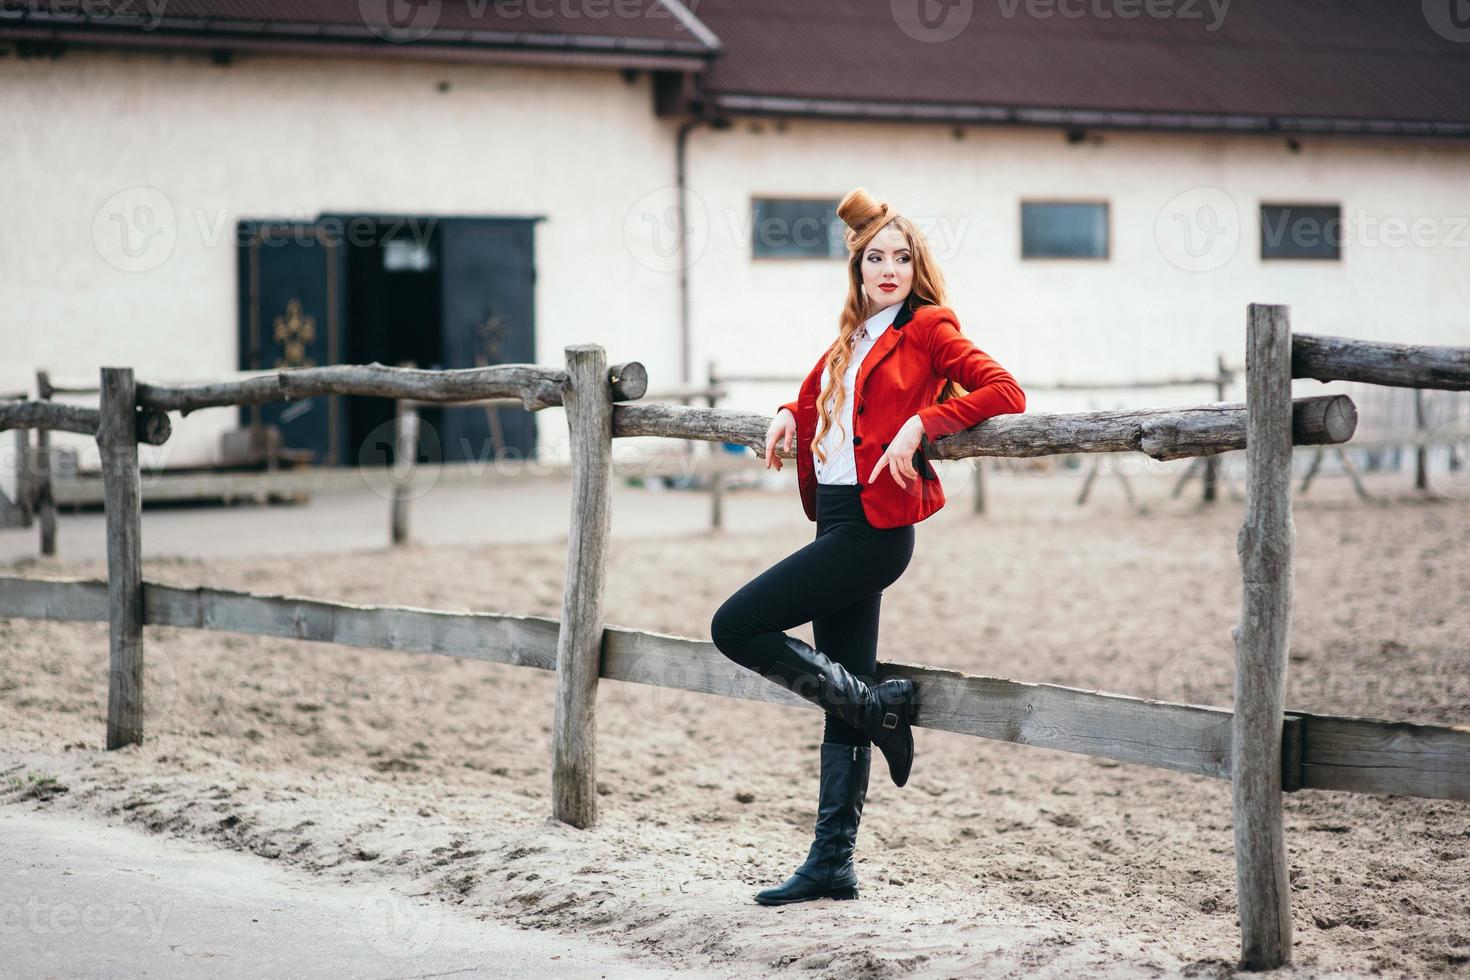 Red-haired jockey girl in a red cardigan and black high boots photo